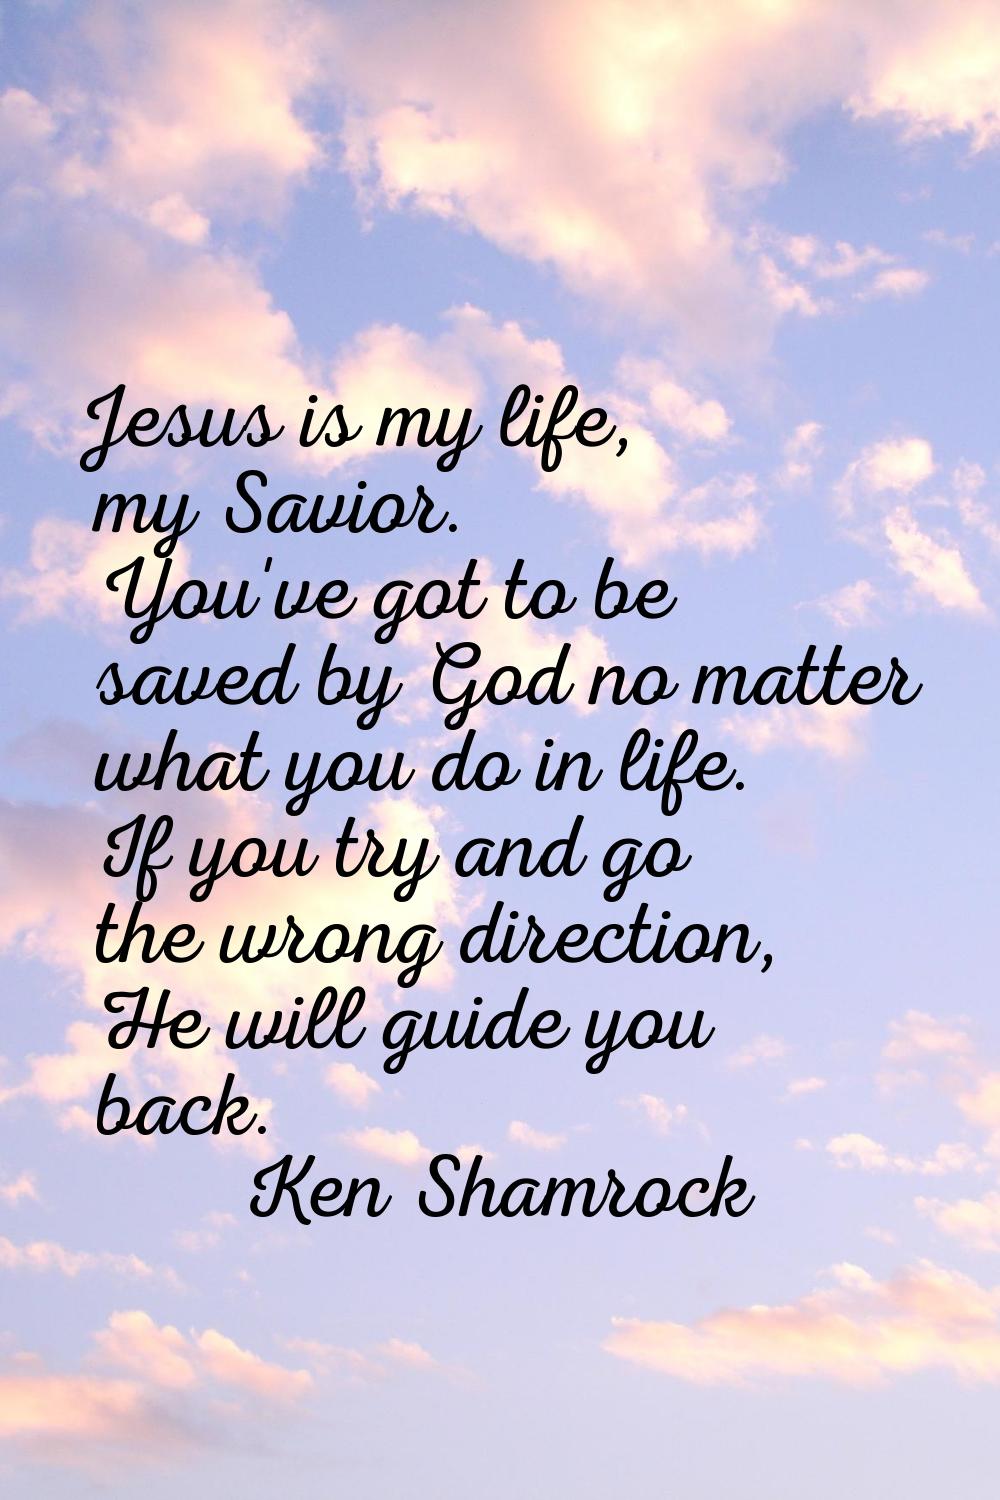 Jesus is my life, my Savior. You've got to be saved by God no matter what you do in life. If you tr